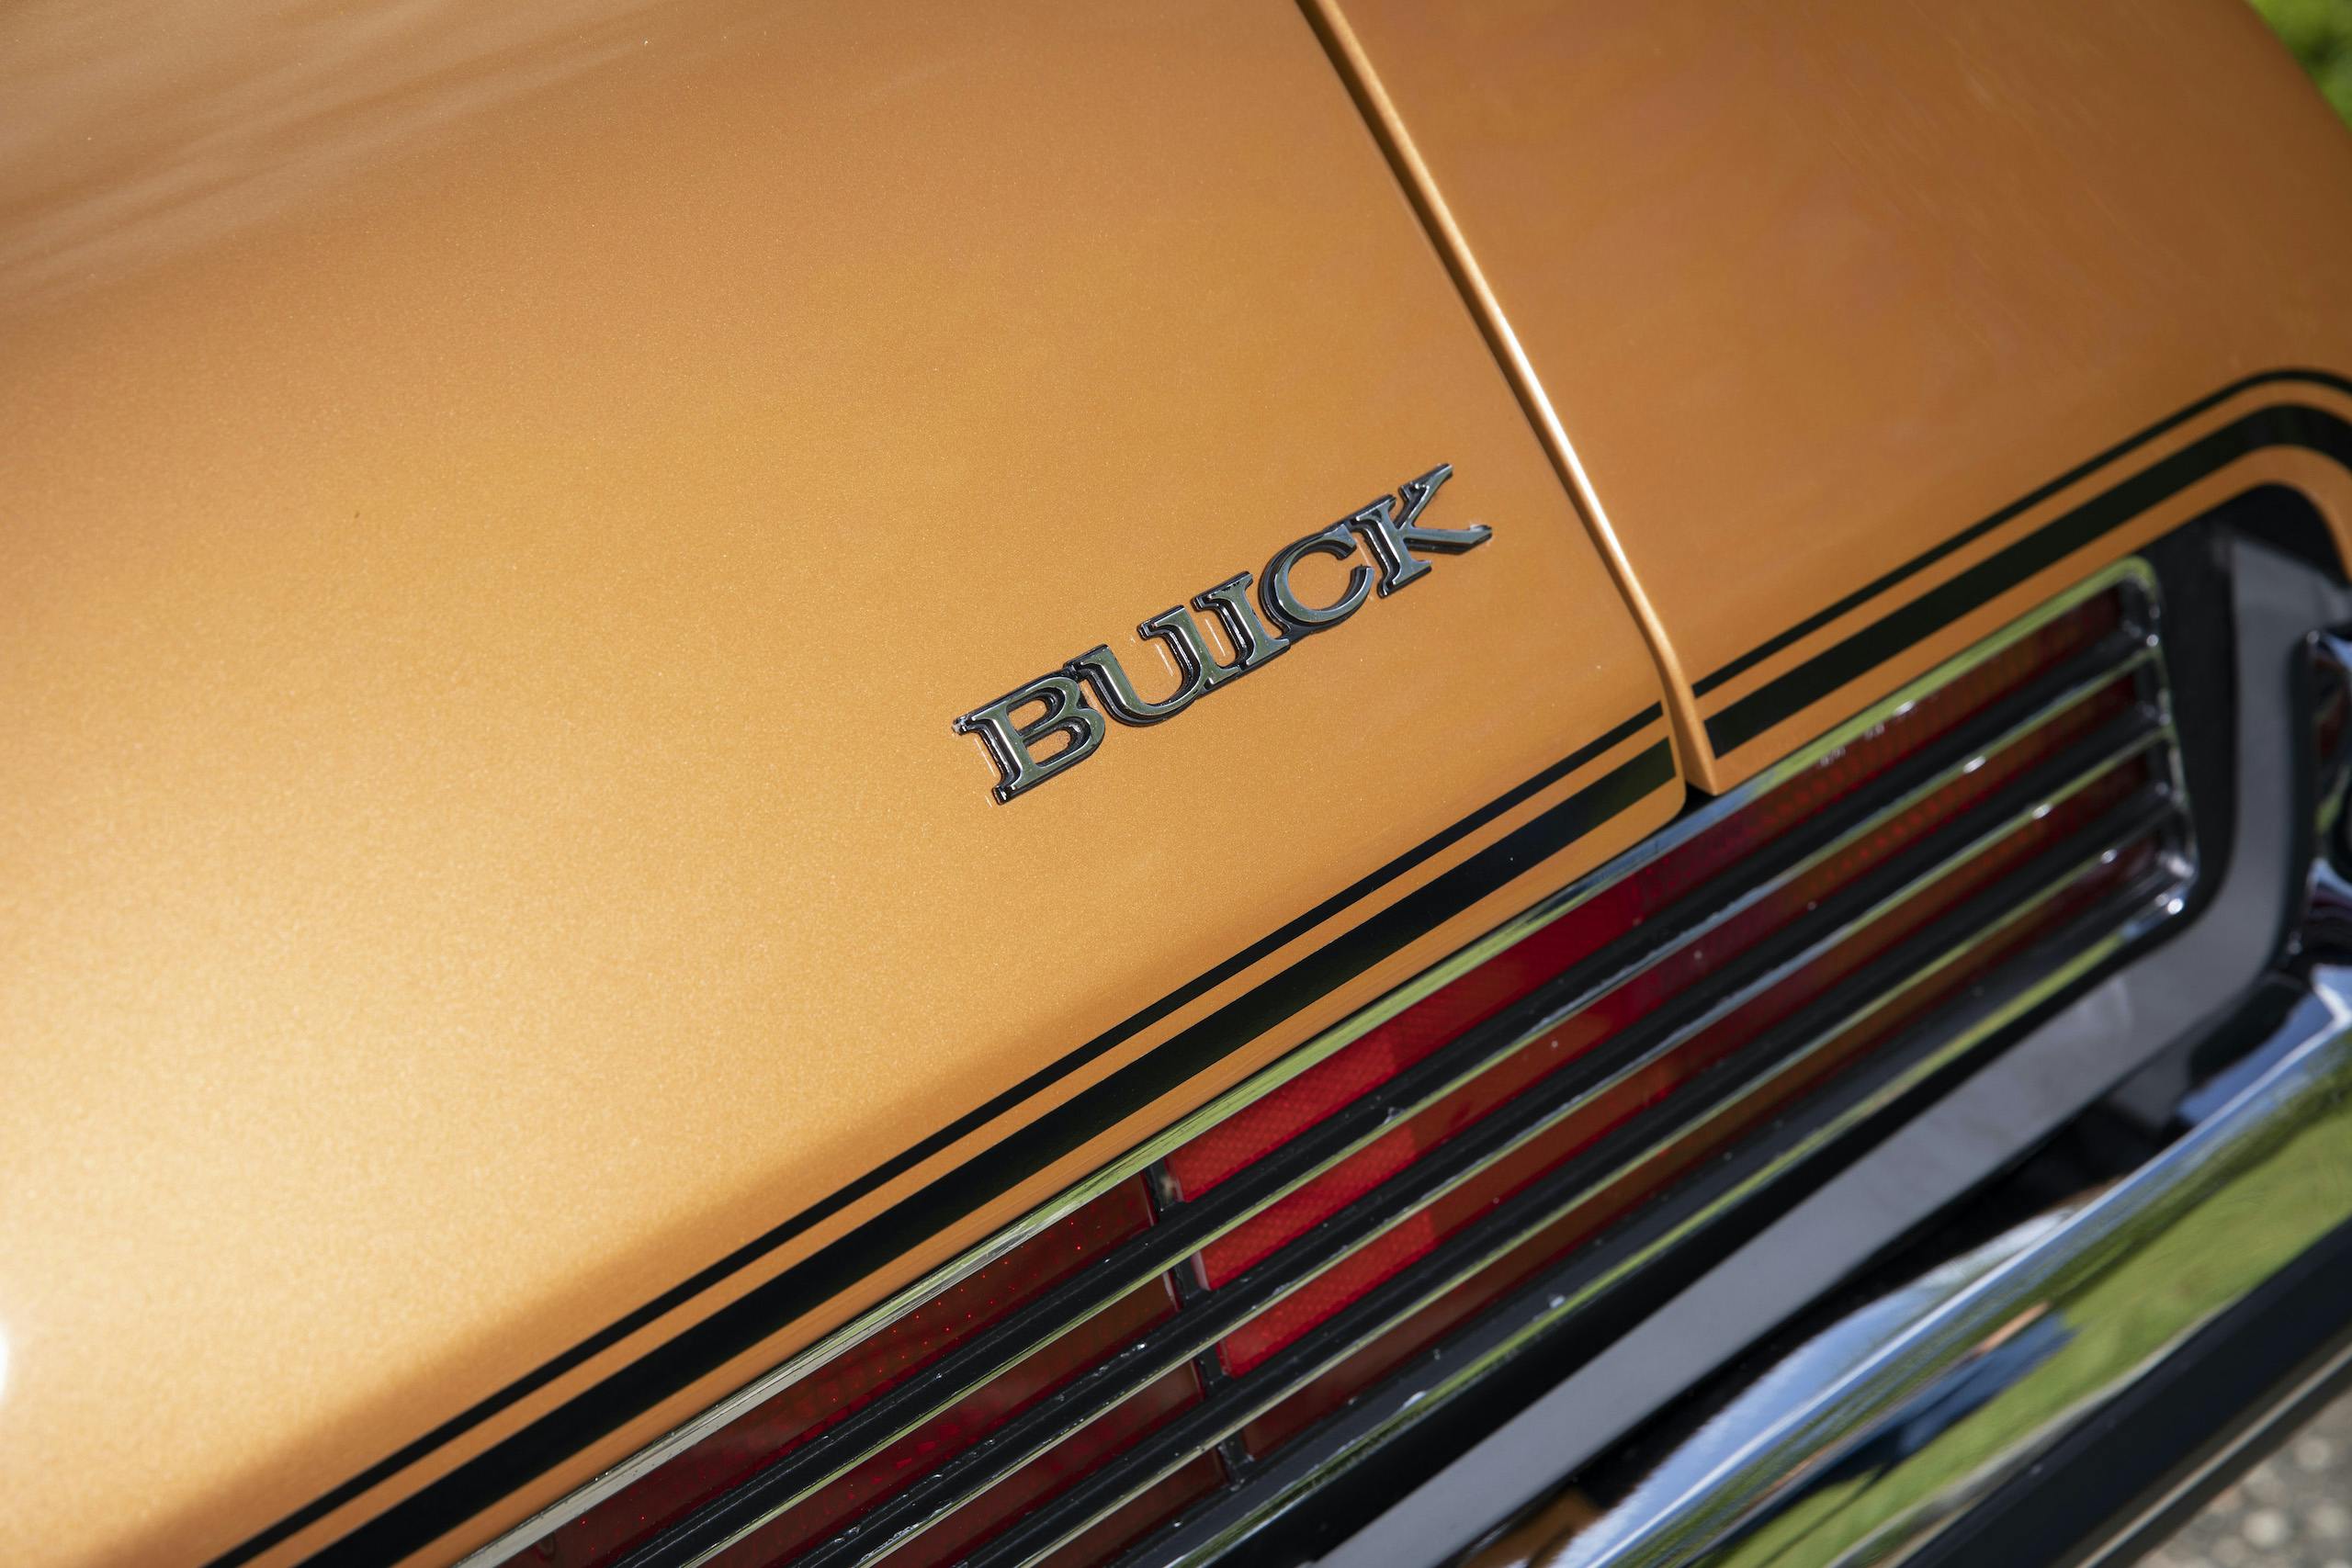 1973 Buick GS Stage 1 gran sport coupe buick badge